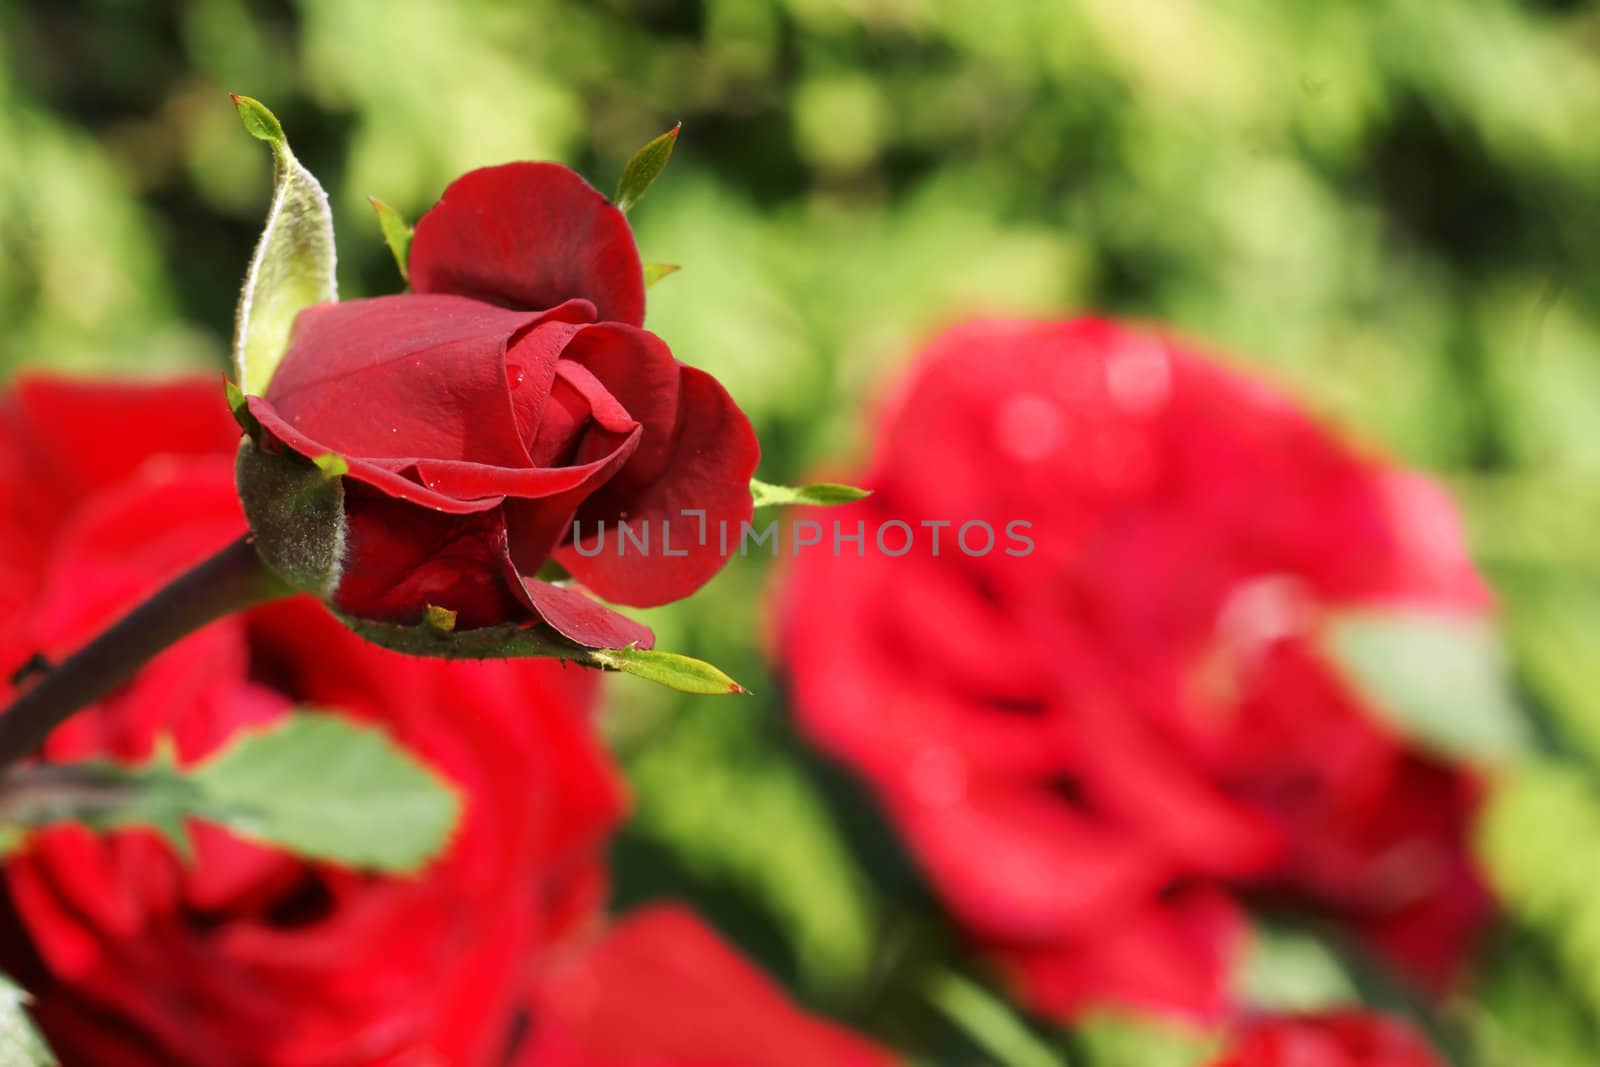 Red rose bud in the garden by Mirage3